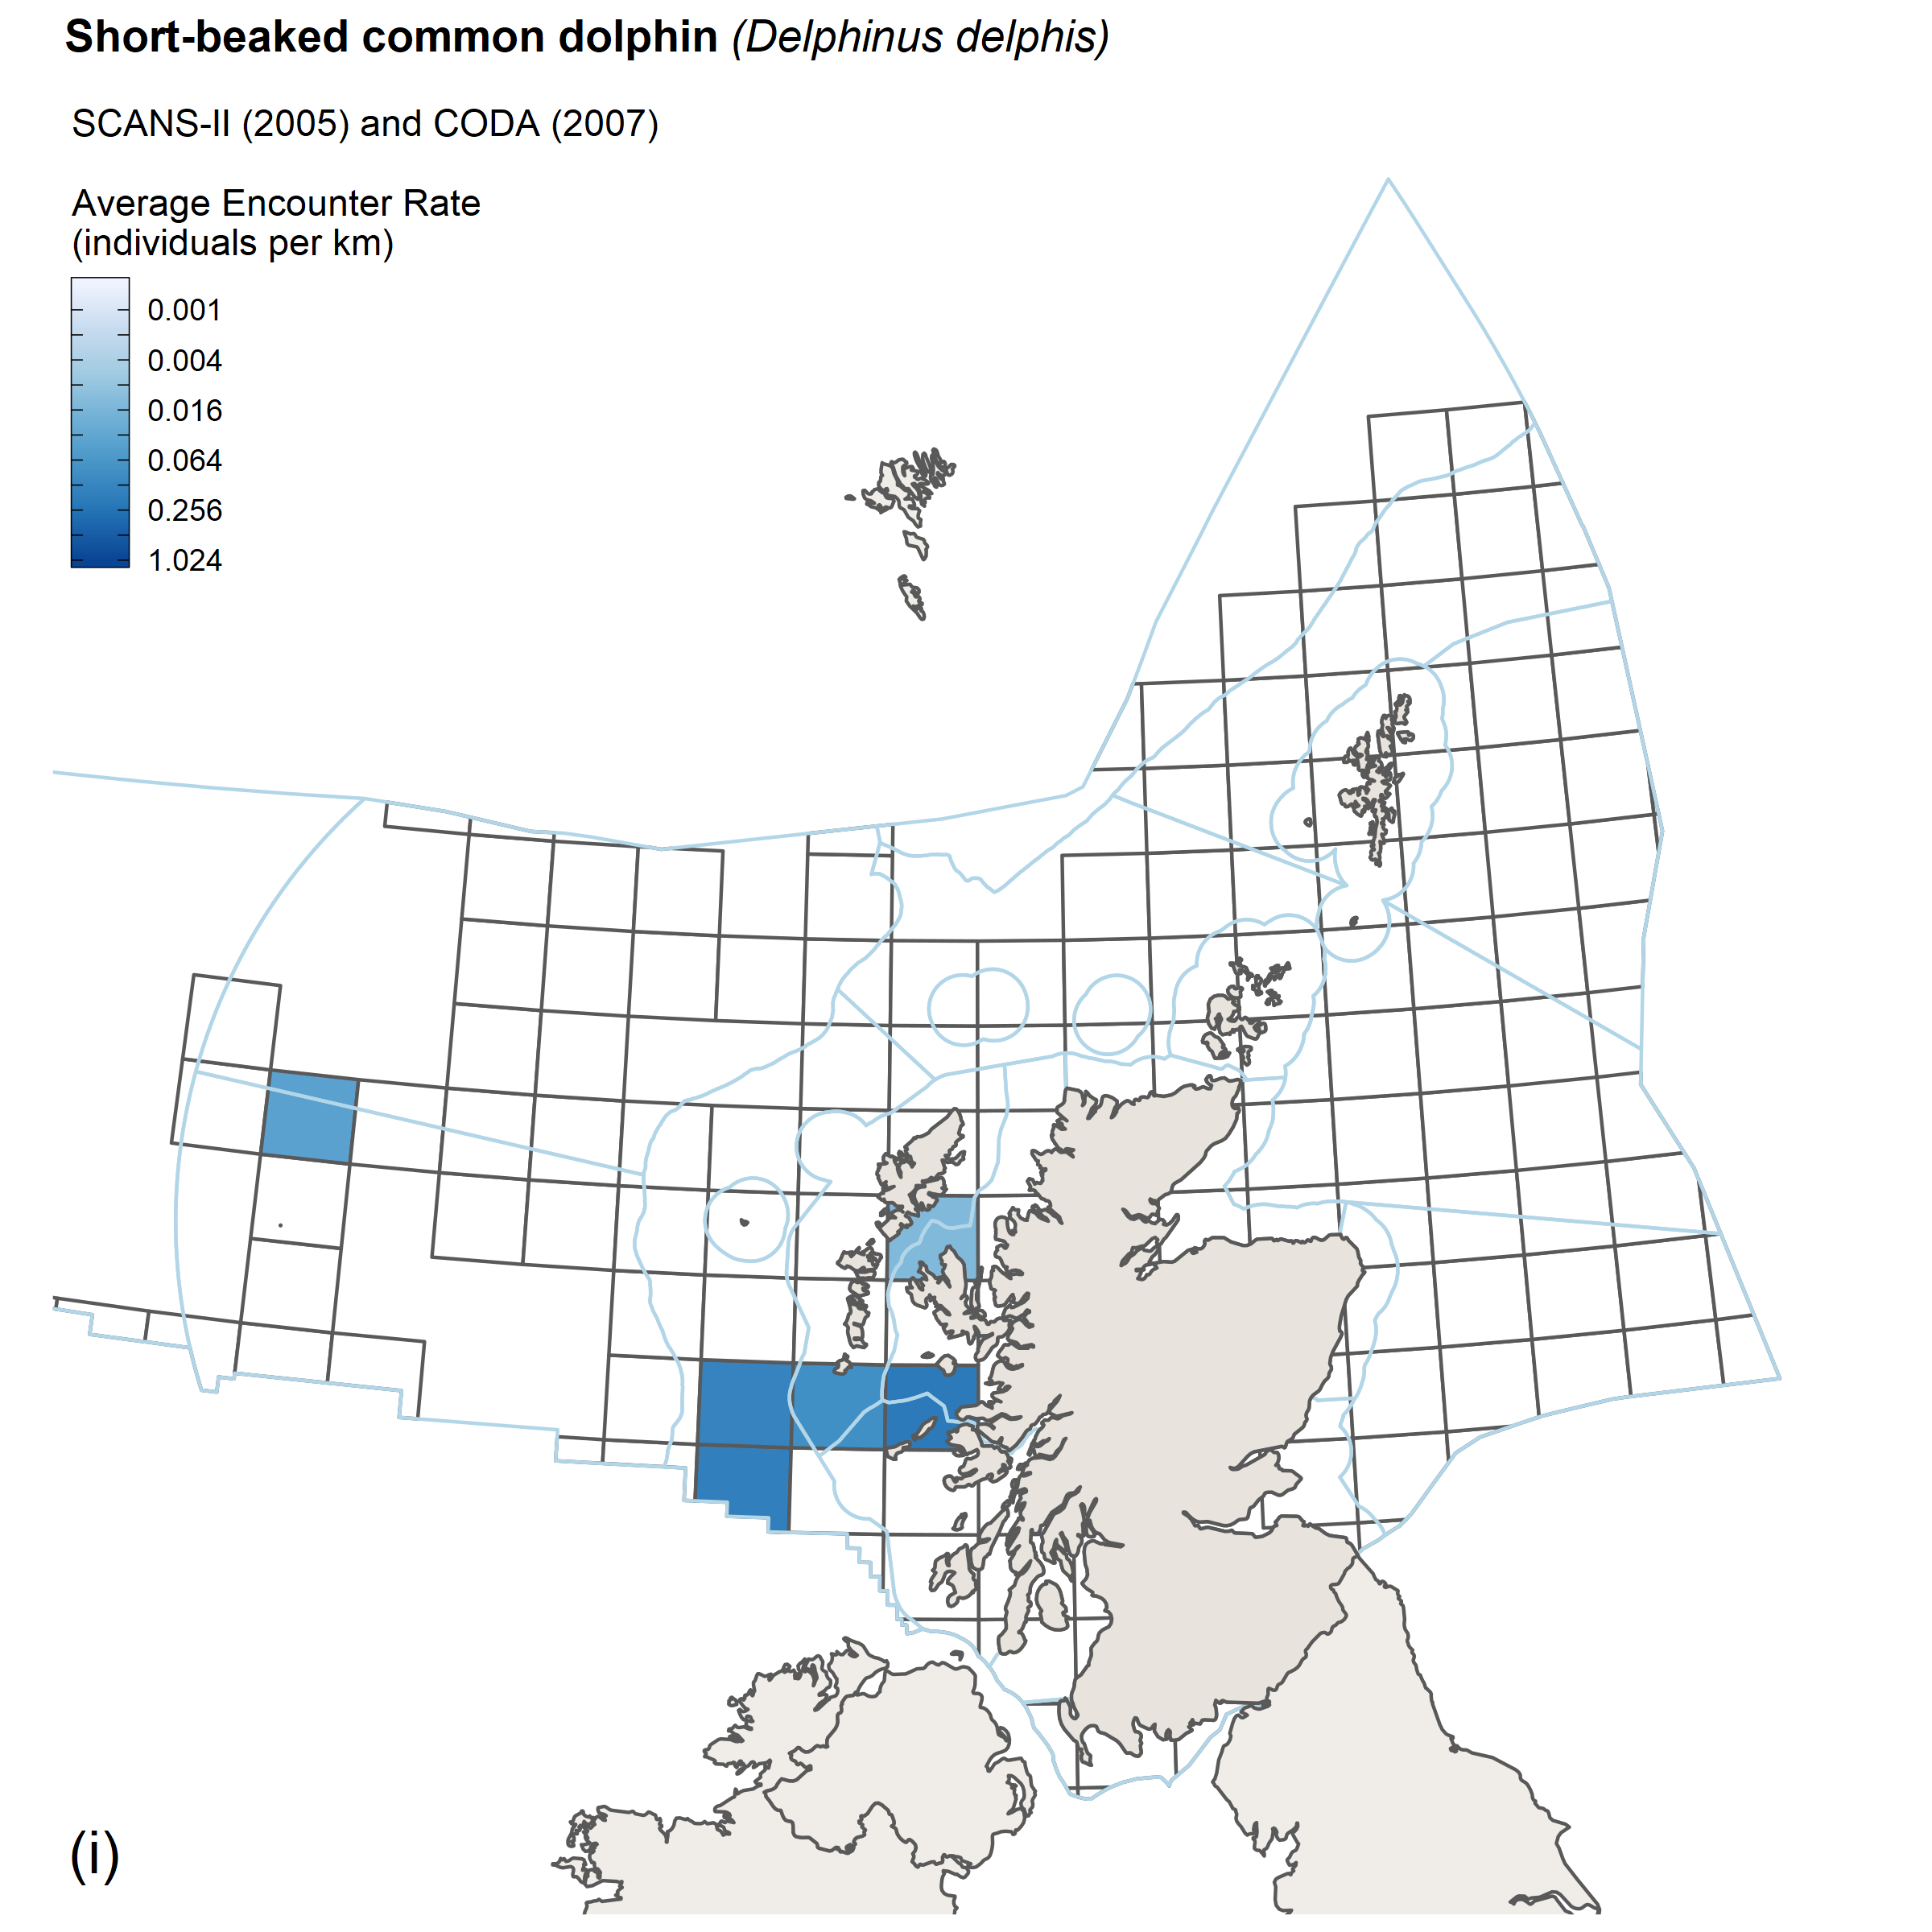 Encounter rates for short-beaked common dolphin from SCANS II/CODA survey